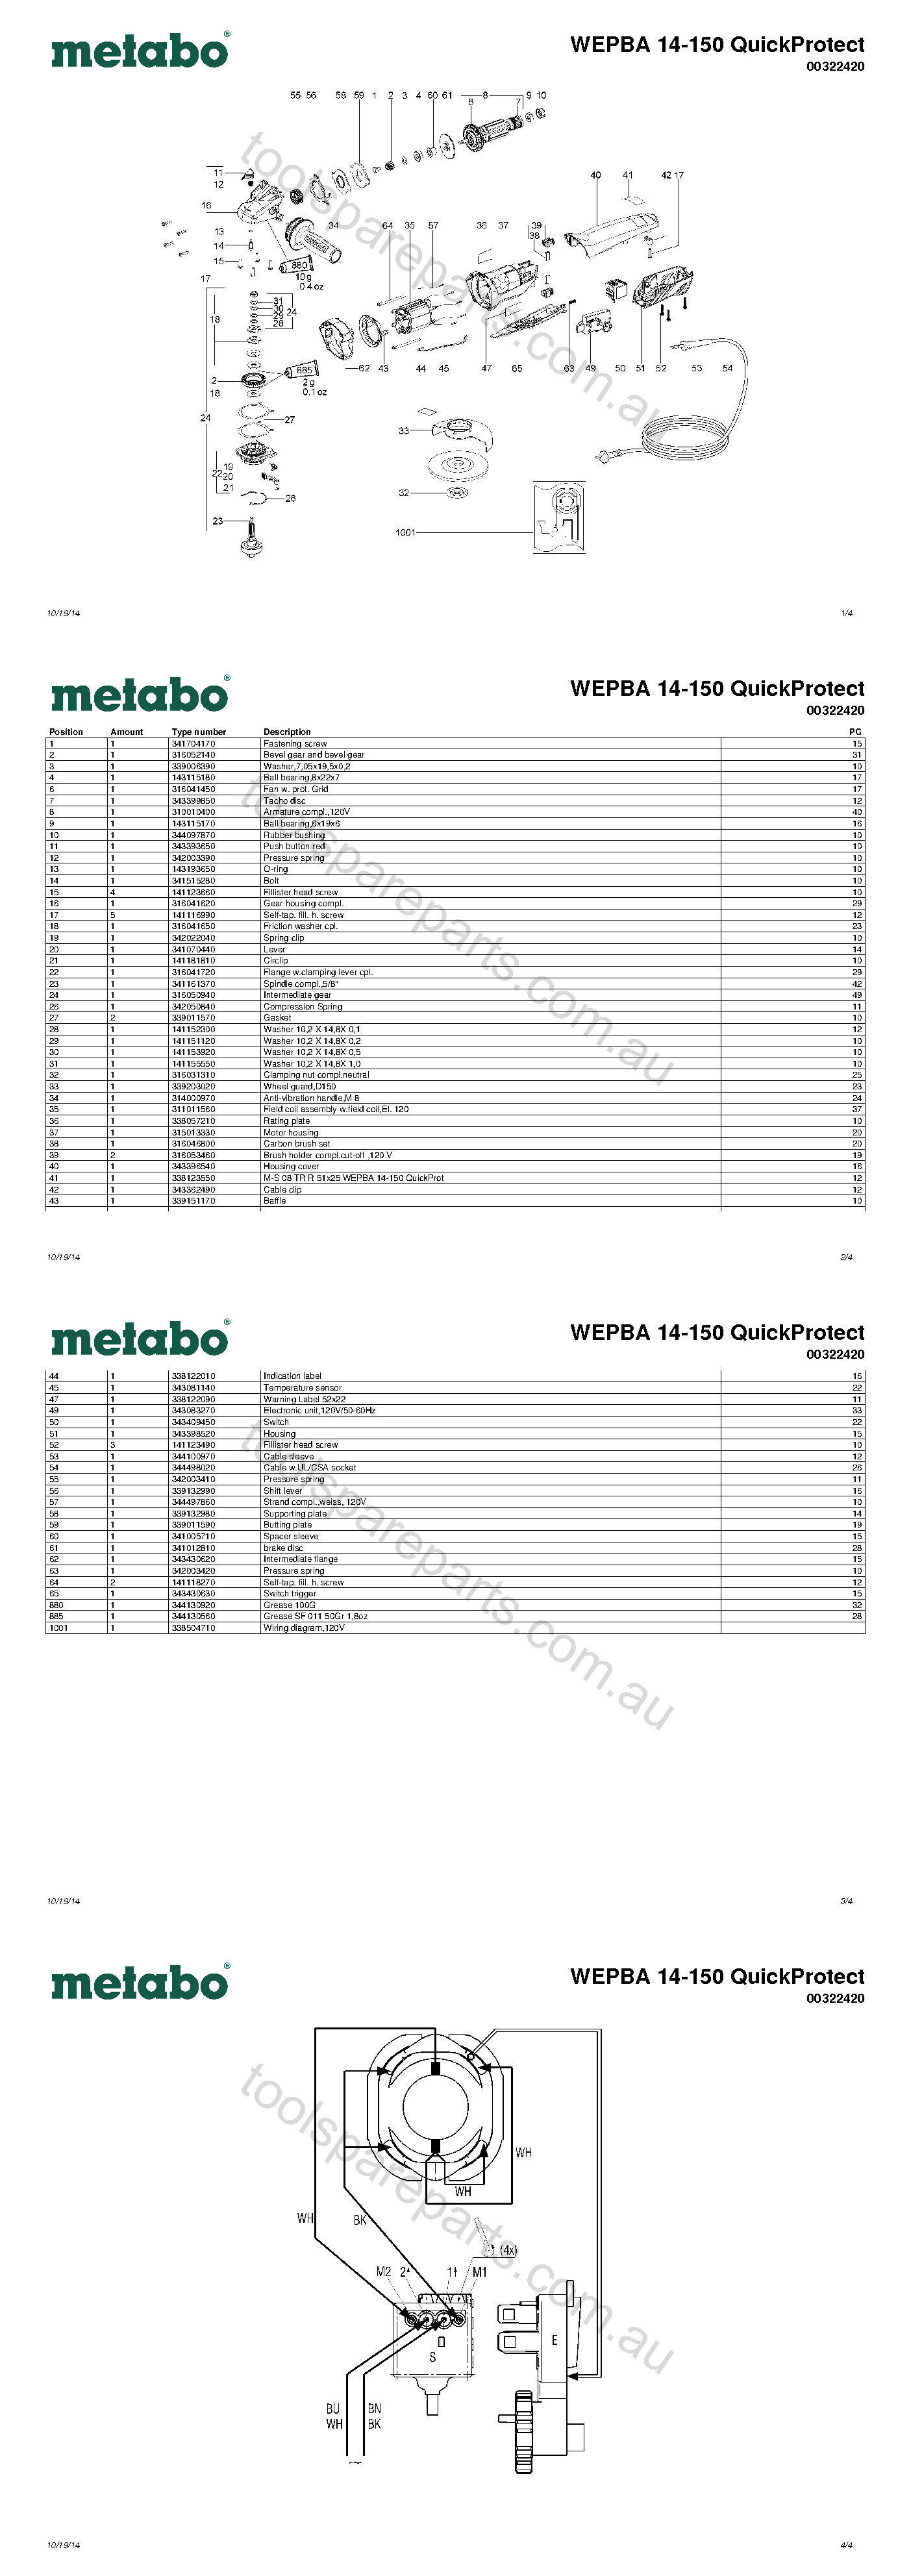 Metabo WEPBA 14-150 QuickProtect 00322420  Diagram 1